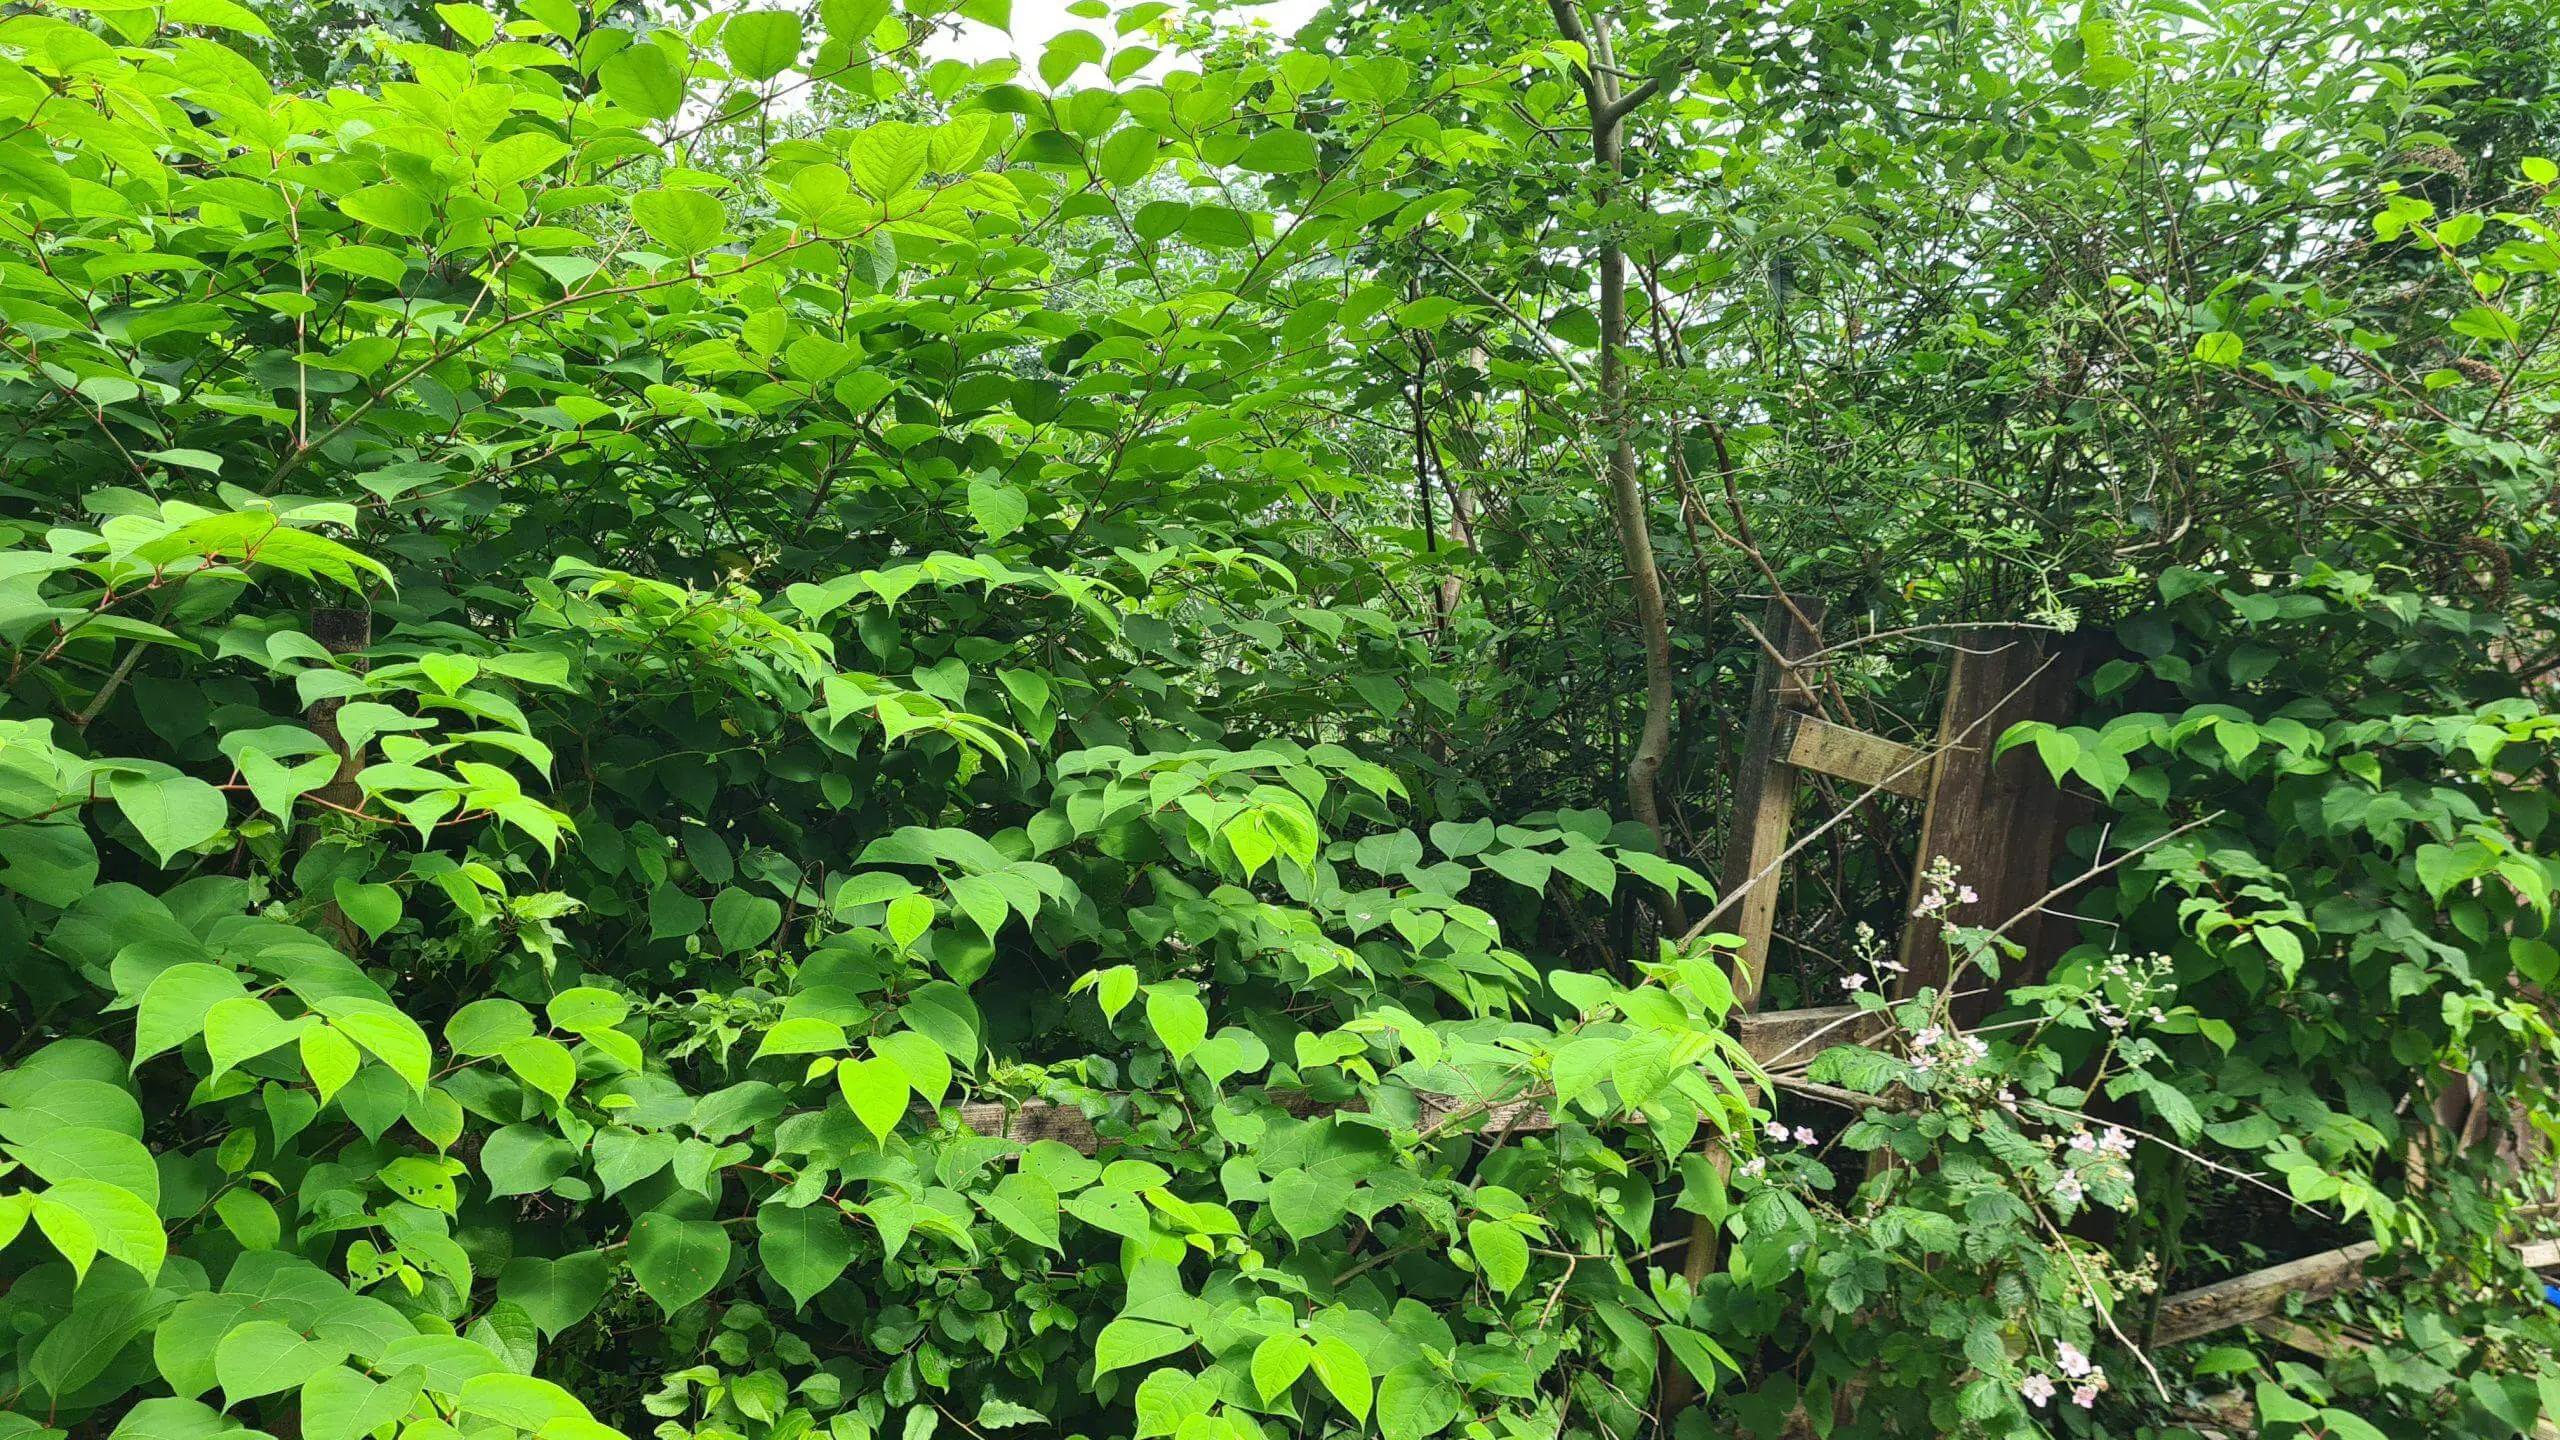 Impossible access to a property consumed by Japanese knotweed